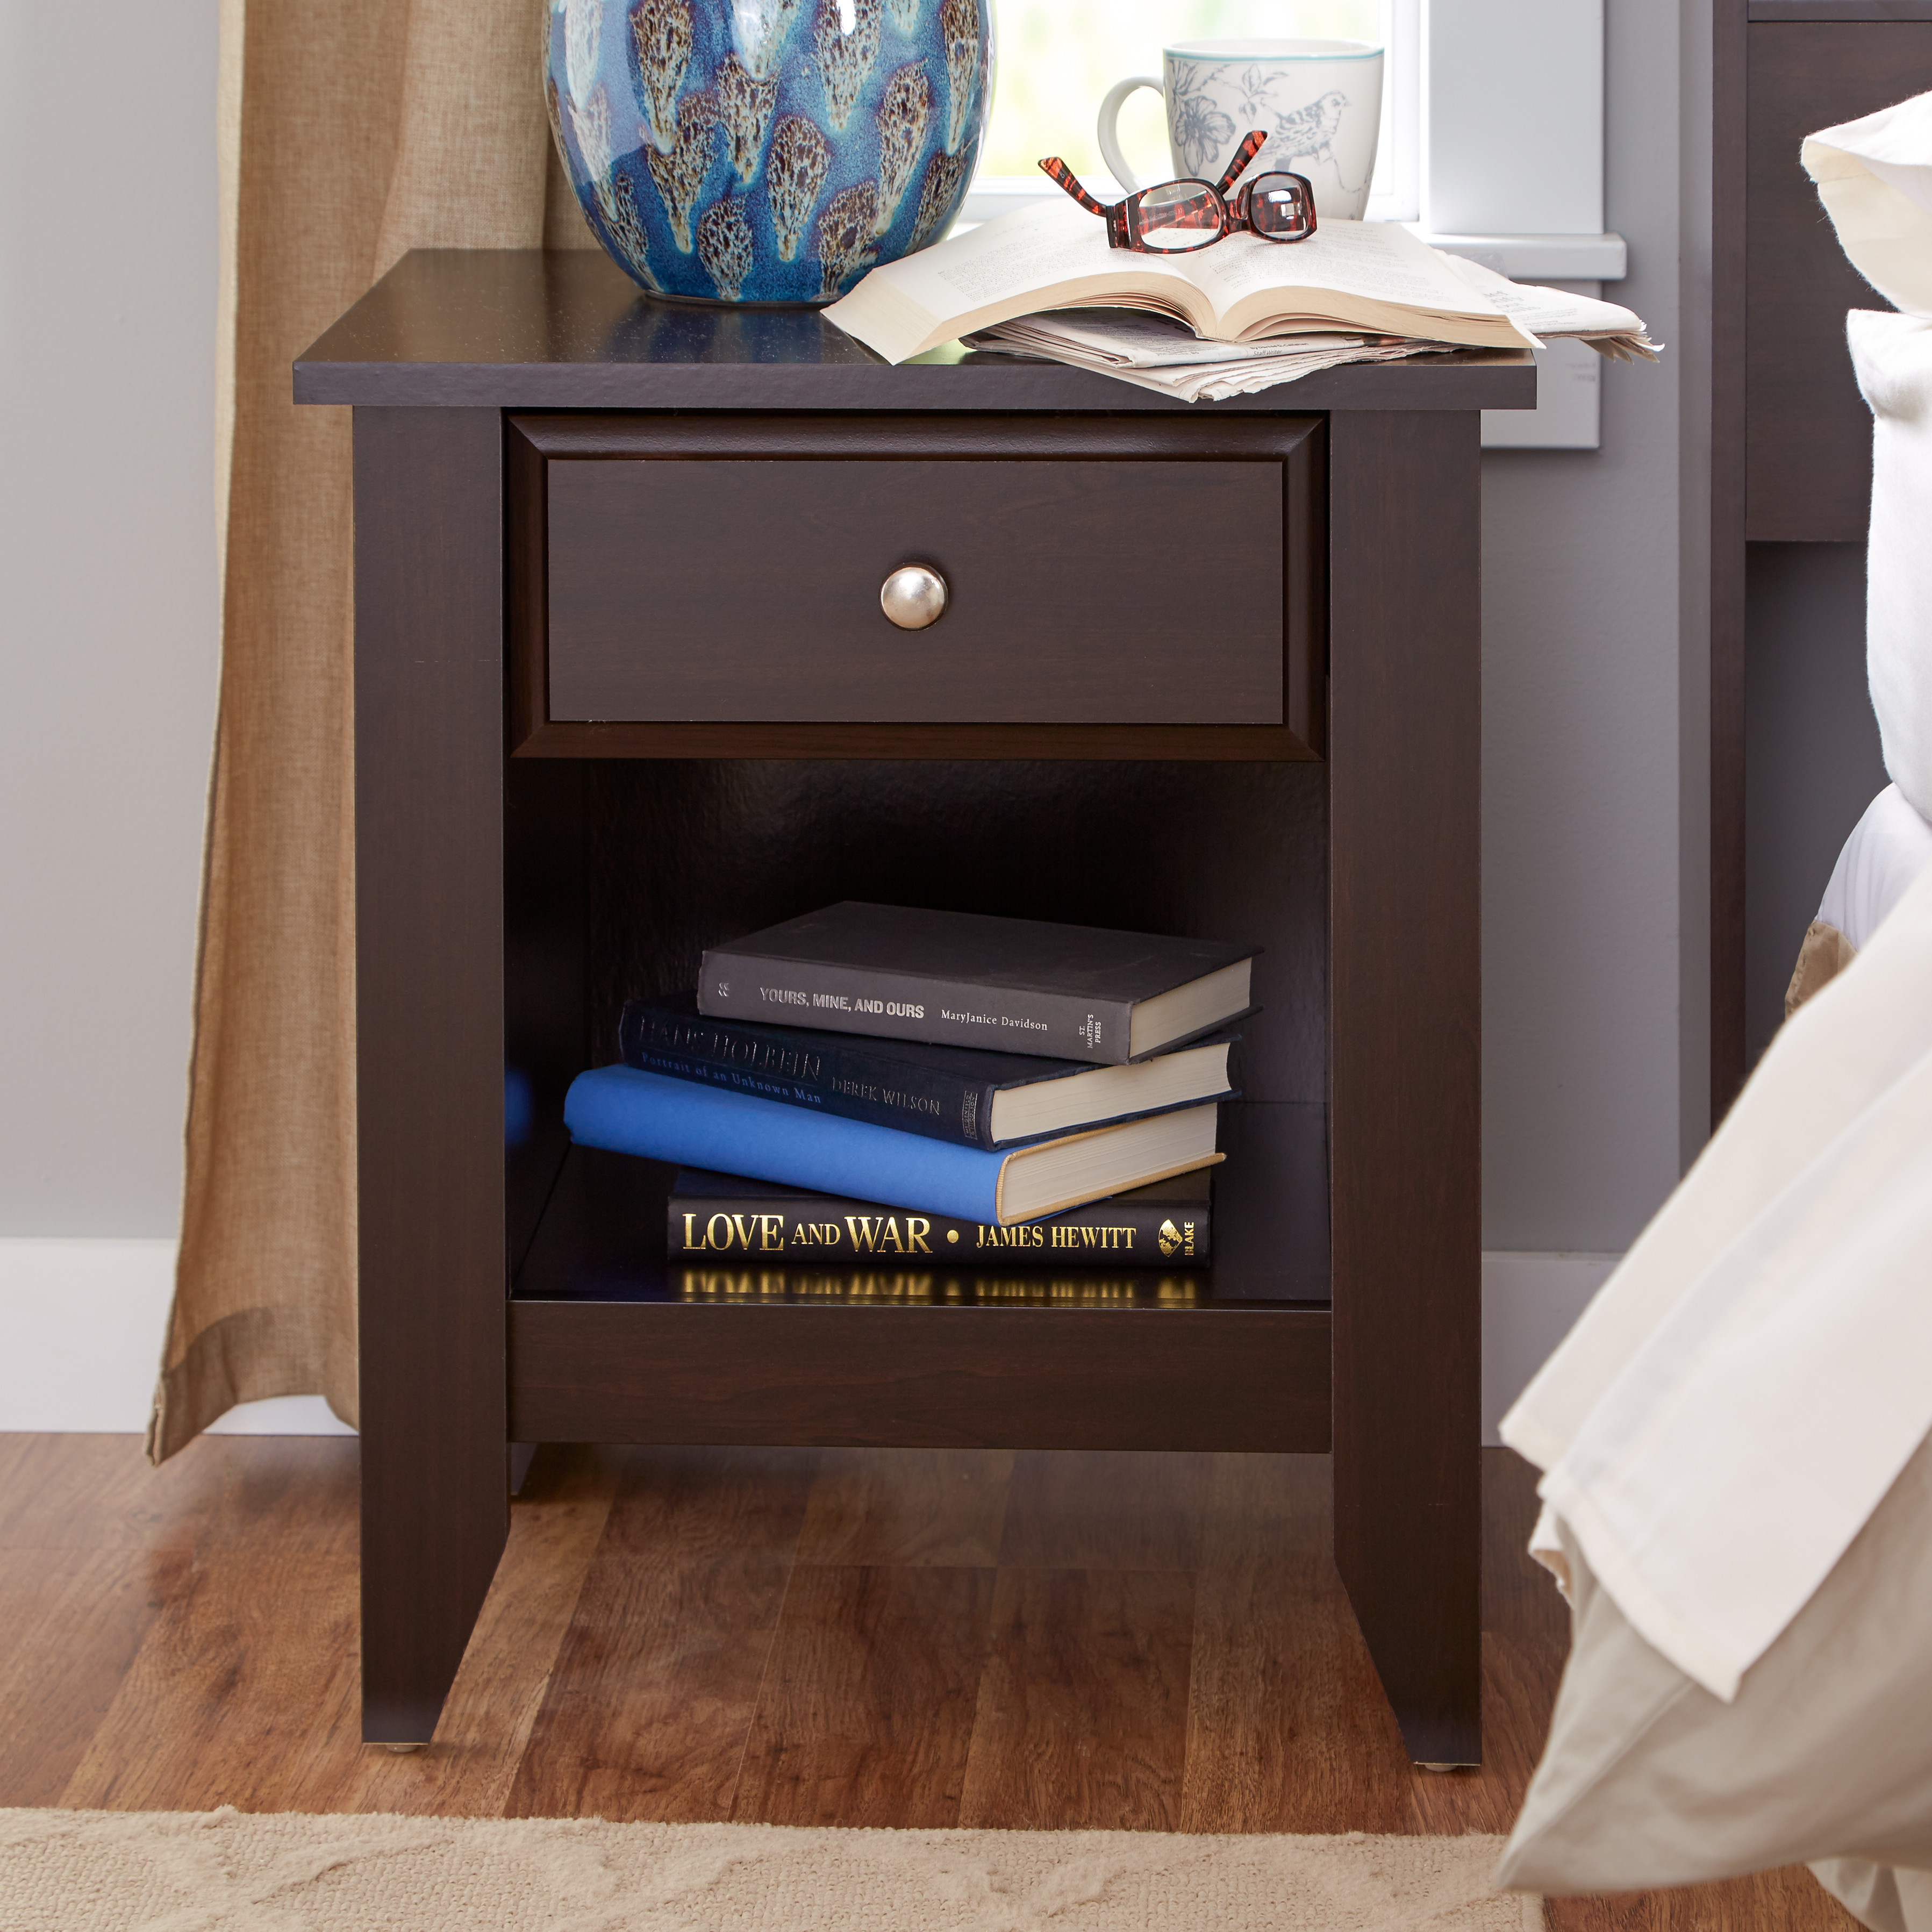 furniture thin accent table floating nightstand ikea night stands mirrored target bedroom tables rast nightstands under bedside stan drawer west elm carpet divider strip wide sofa